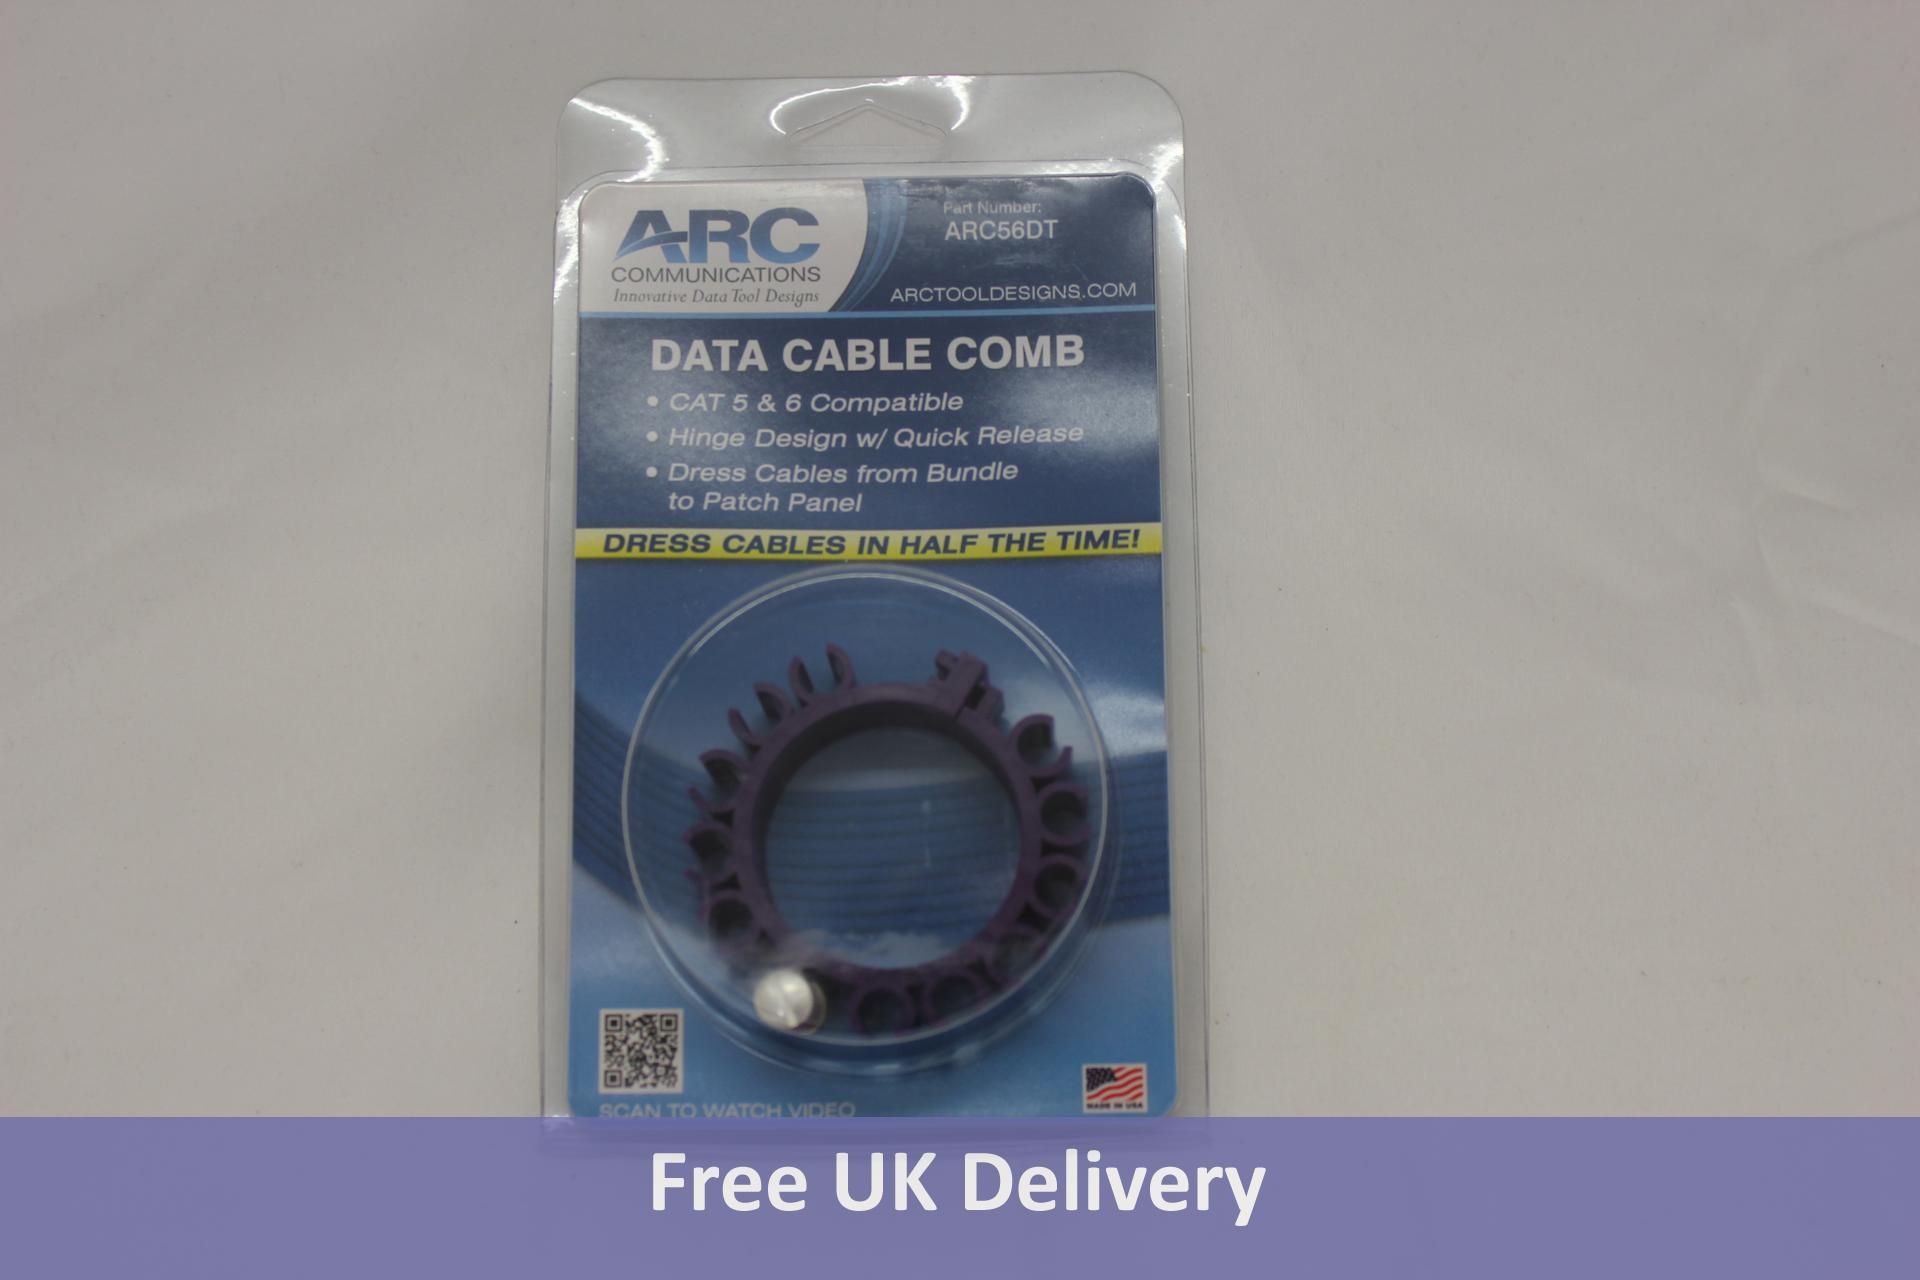 ARC Communications Data Cable Comb